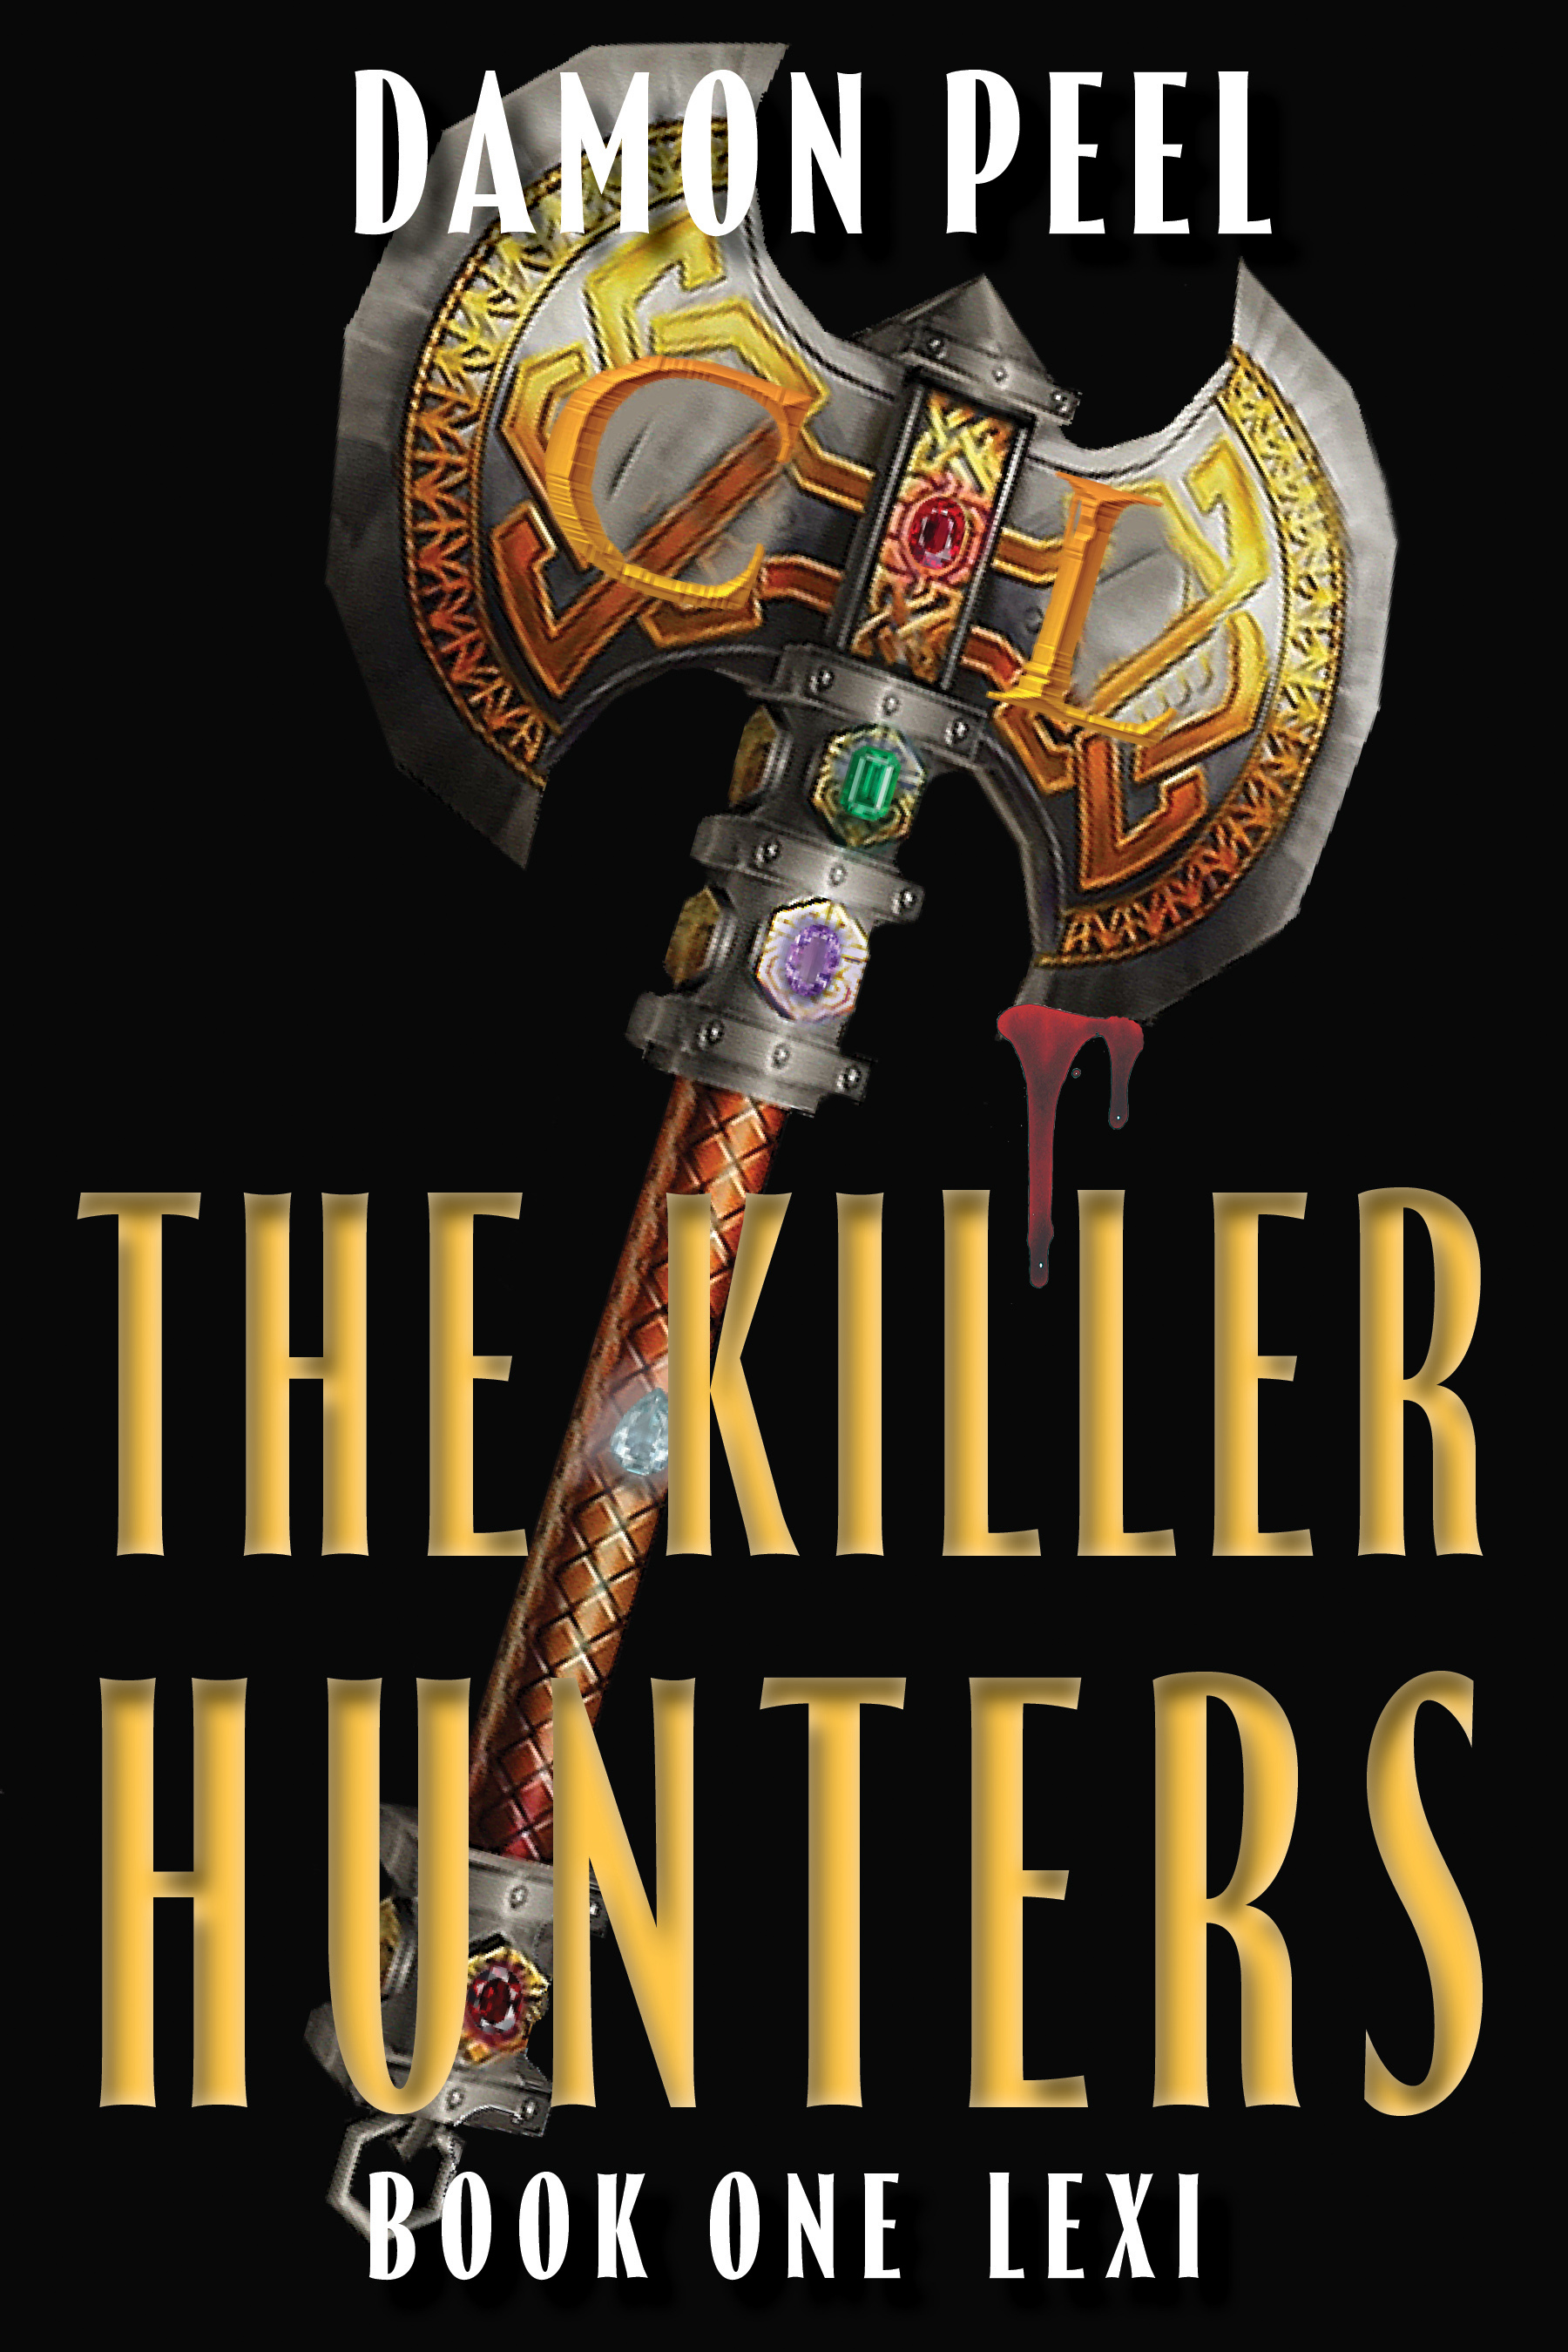 New novel "The Killer Hunters" by Damon Peel is released, the first book in a horror adventure series that follows a group of young people that fights against movie villains come to life 